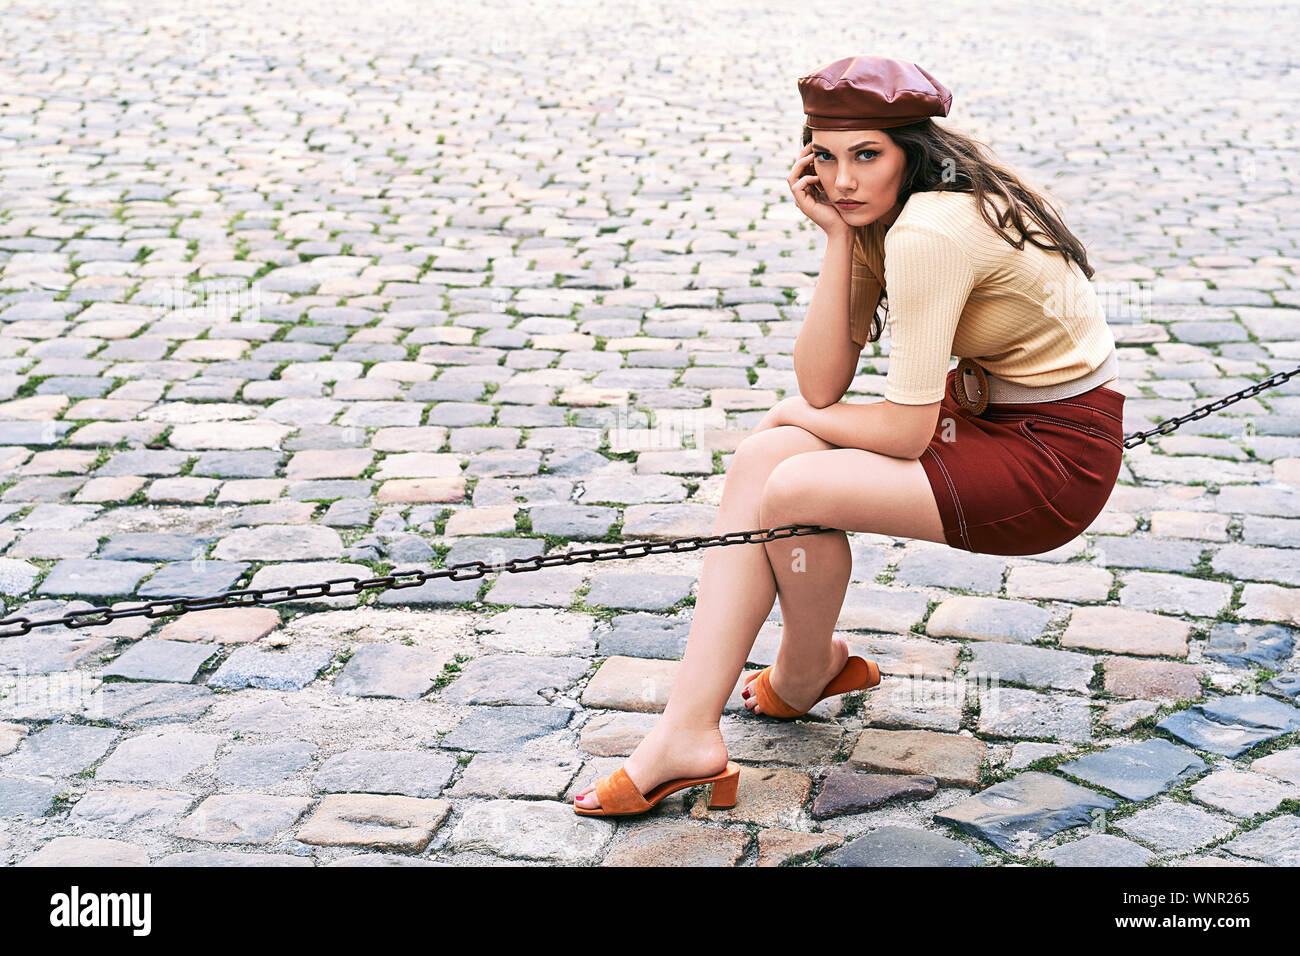 A Young Model 70s High Resolution Stock Photography and Images - Alamy